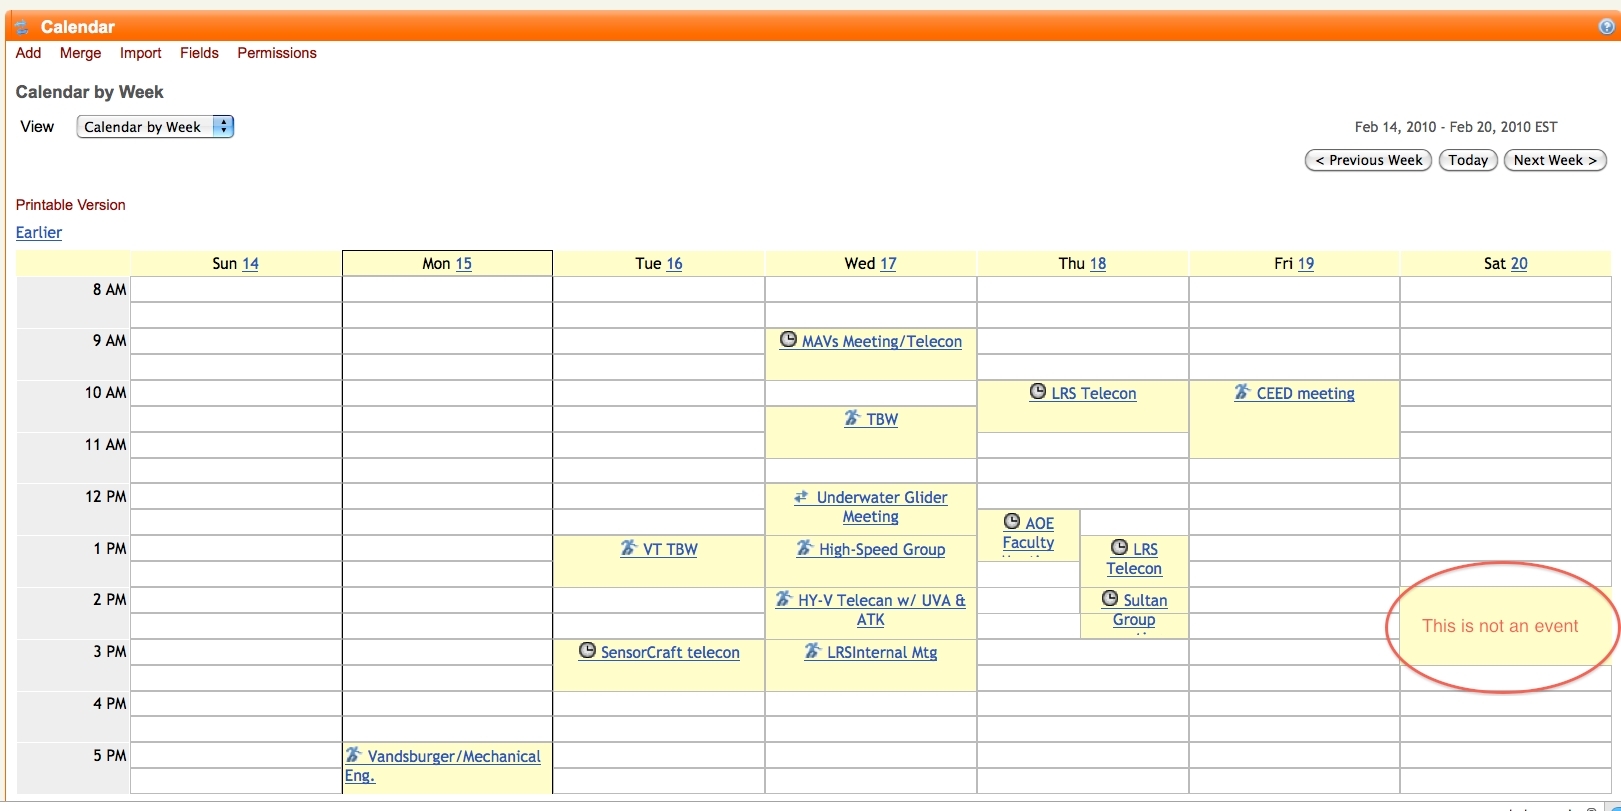 Excel Monthly Calendar Template With Time Slots – Free Monthly regarding Images Of Blank Calendars With Time Slots